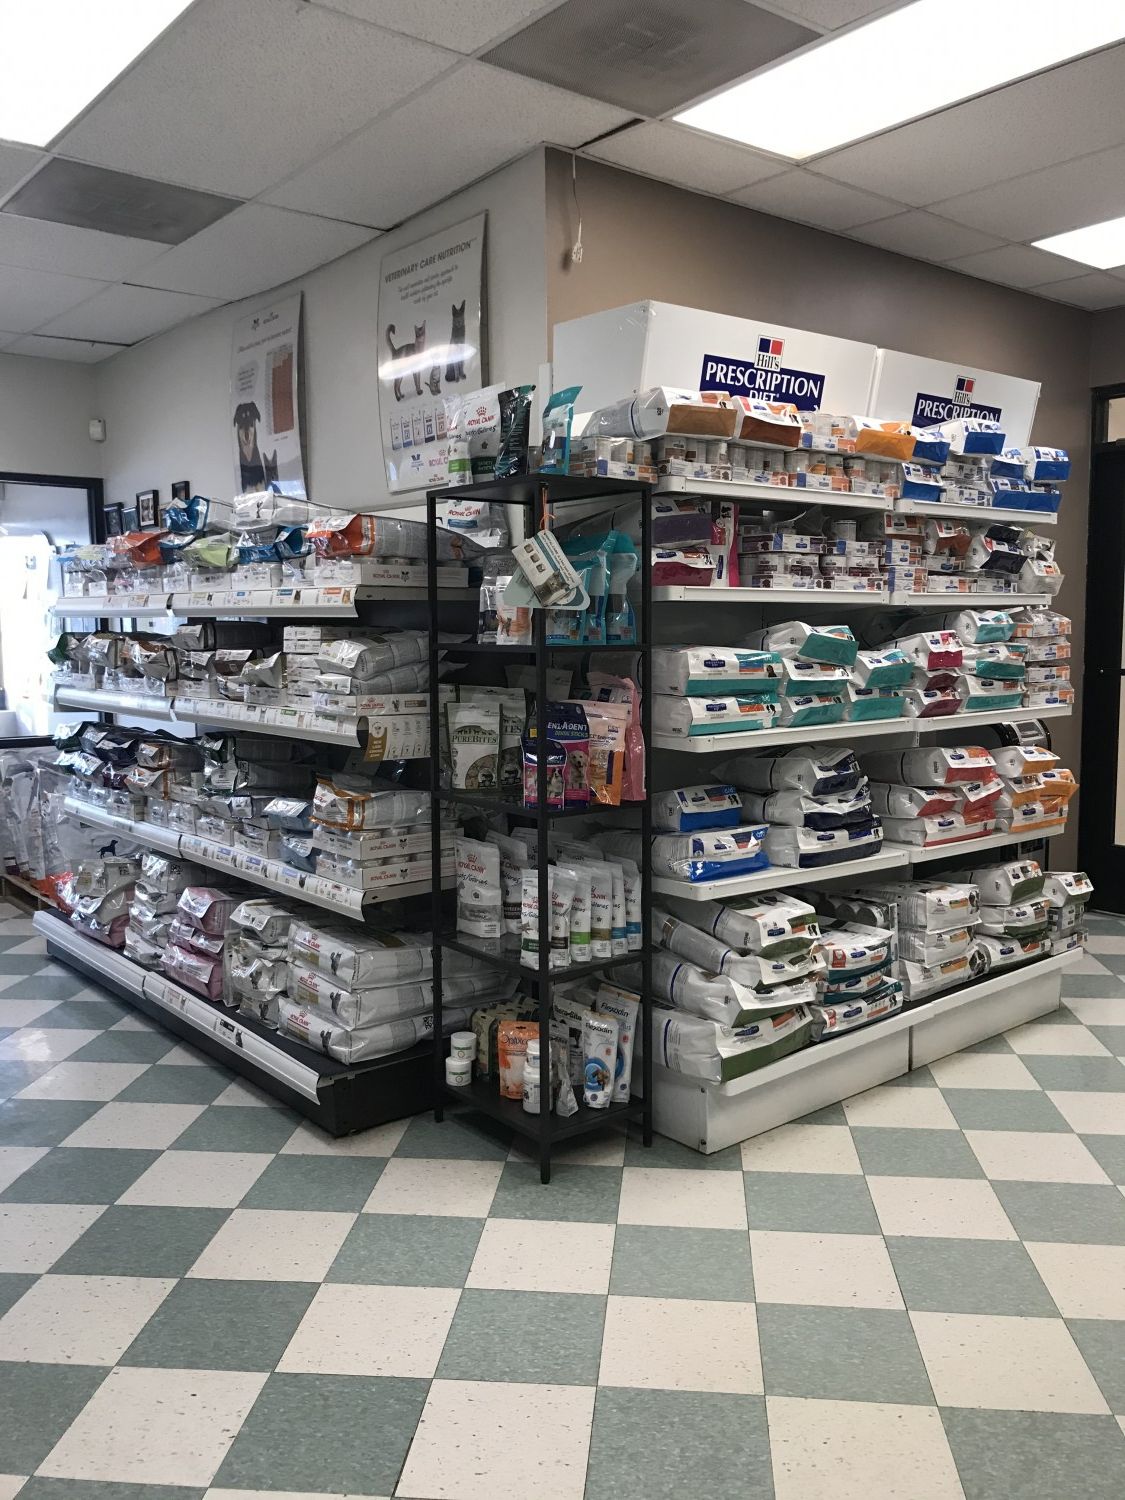 Picture of front lobby with prescription diets